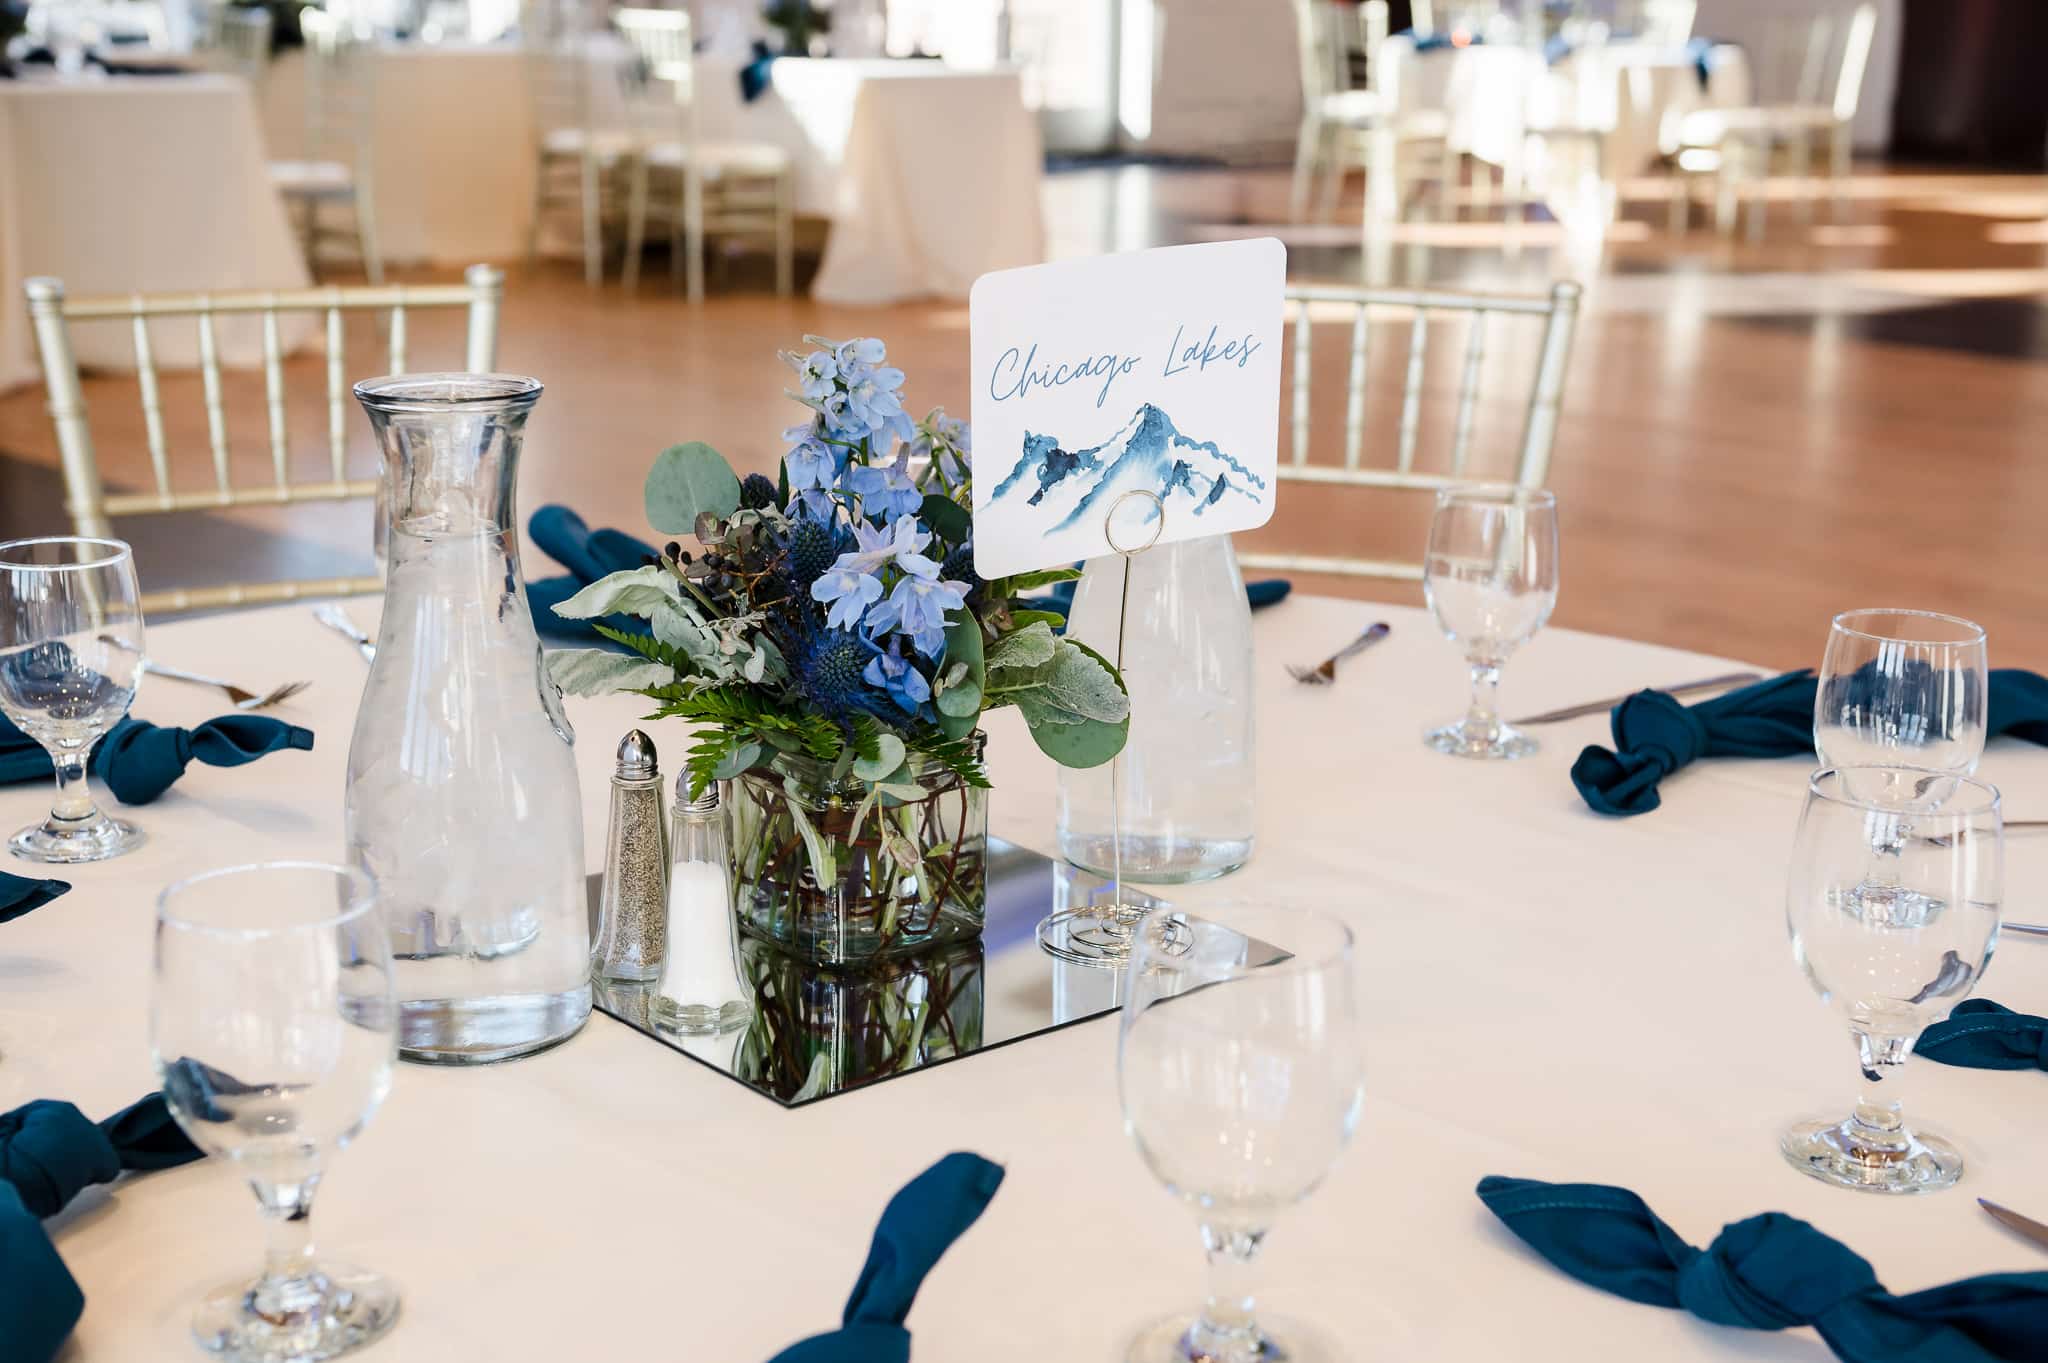 Close up of a wedding table that includes a card labeled "Chicago Lakes" one of many sites where the bride and groom hiked. They used locations instead of numbers to identify where guests should be seated.